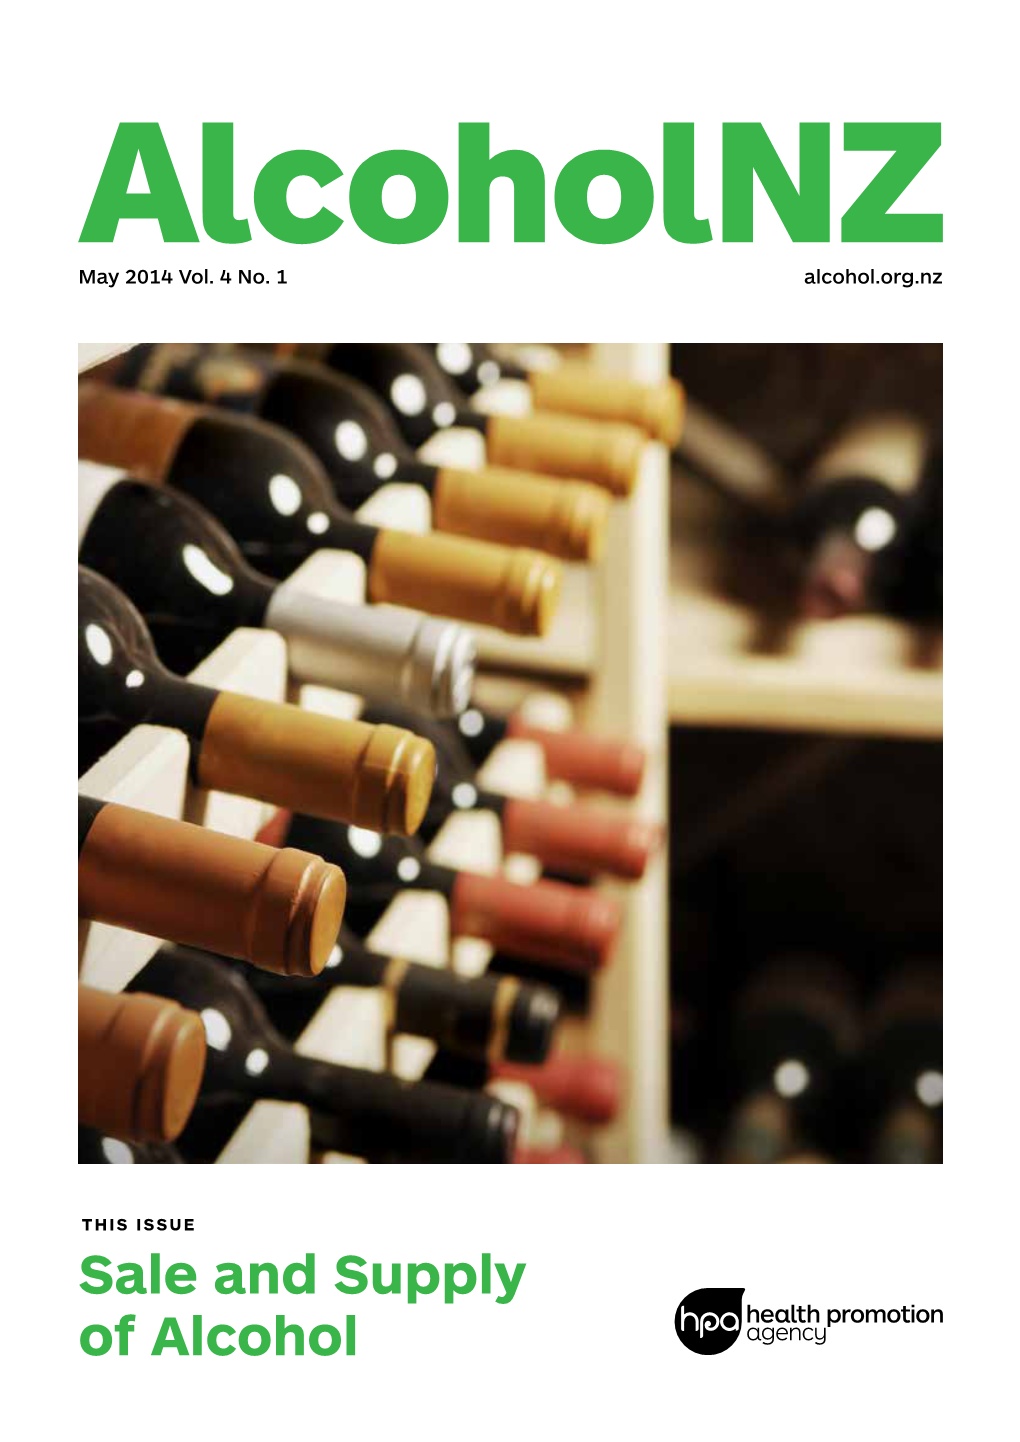 Sale and Supply of Alcohol Alcoholnz May 2014 • 2 Message from the Minister